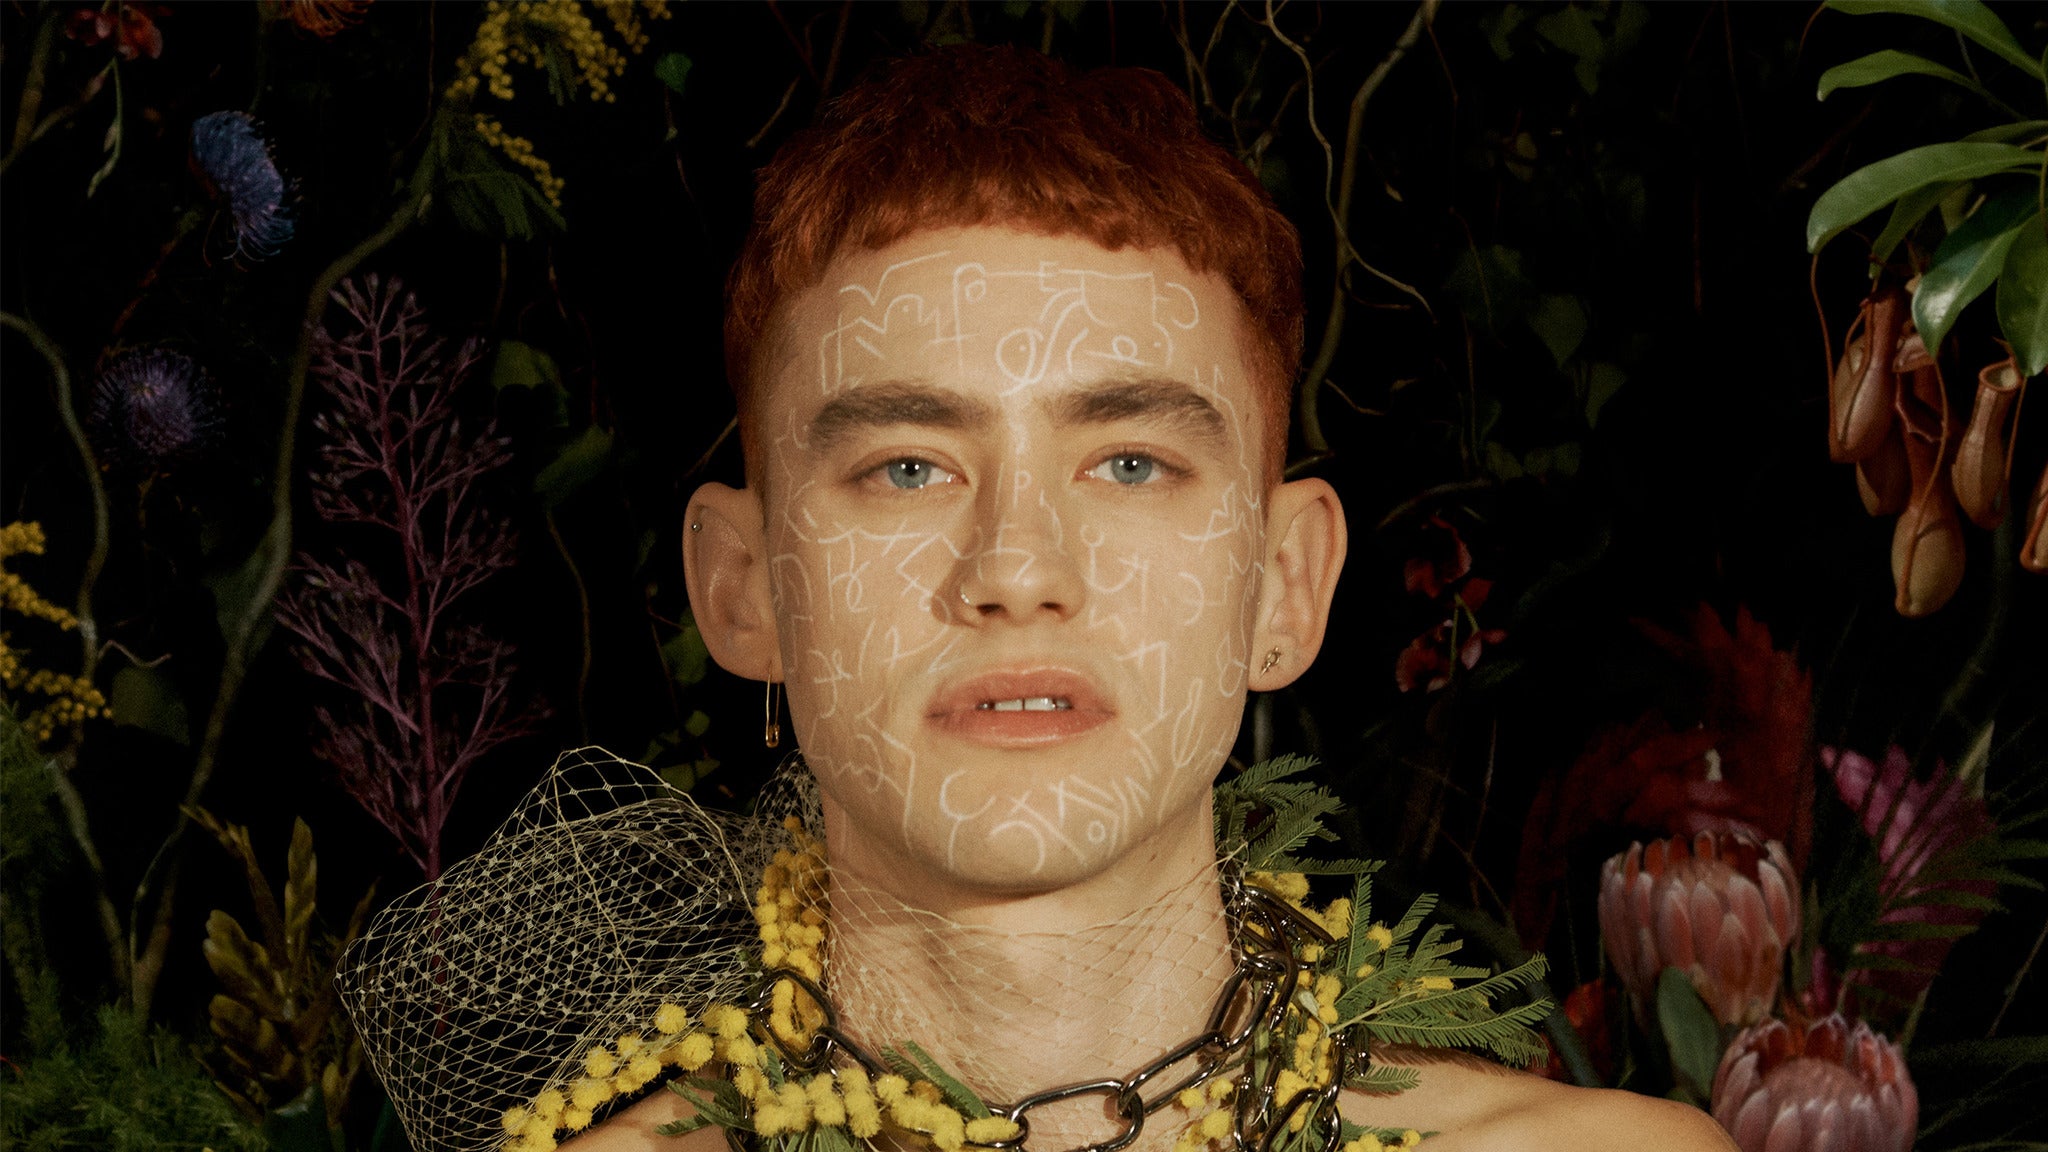 Years & Years in Pittsburgh promo photo for Album Pre-Order presale offer code